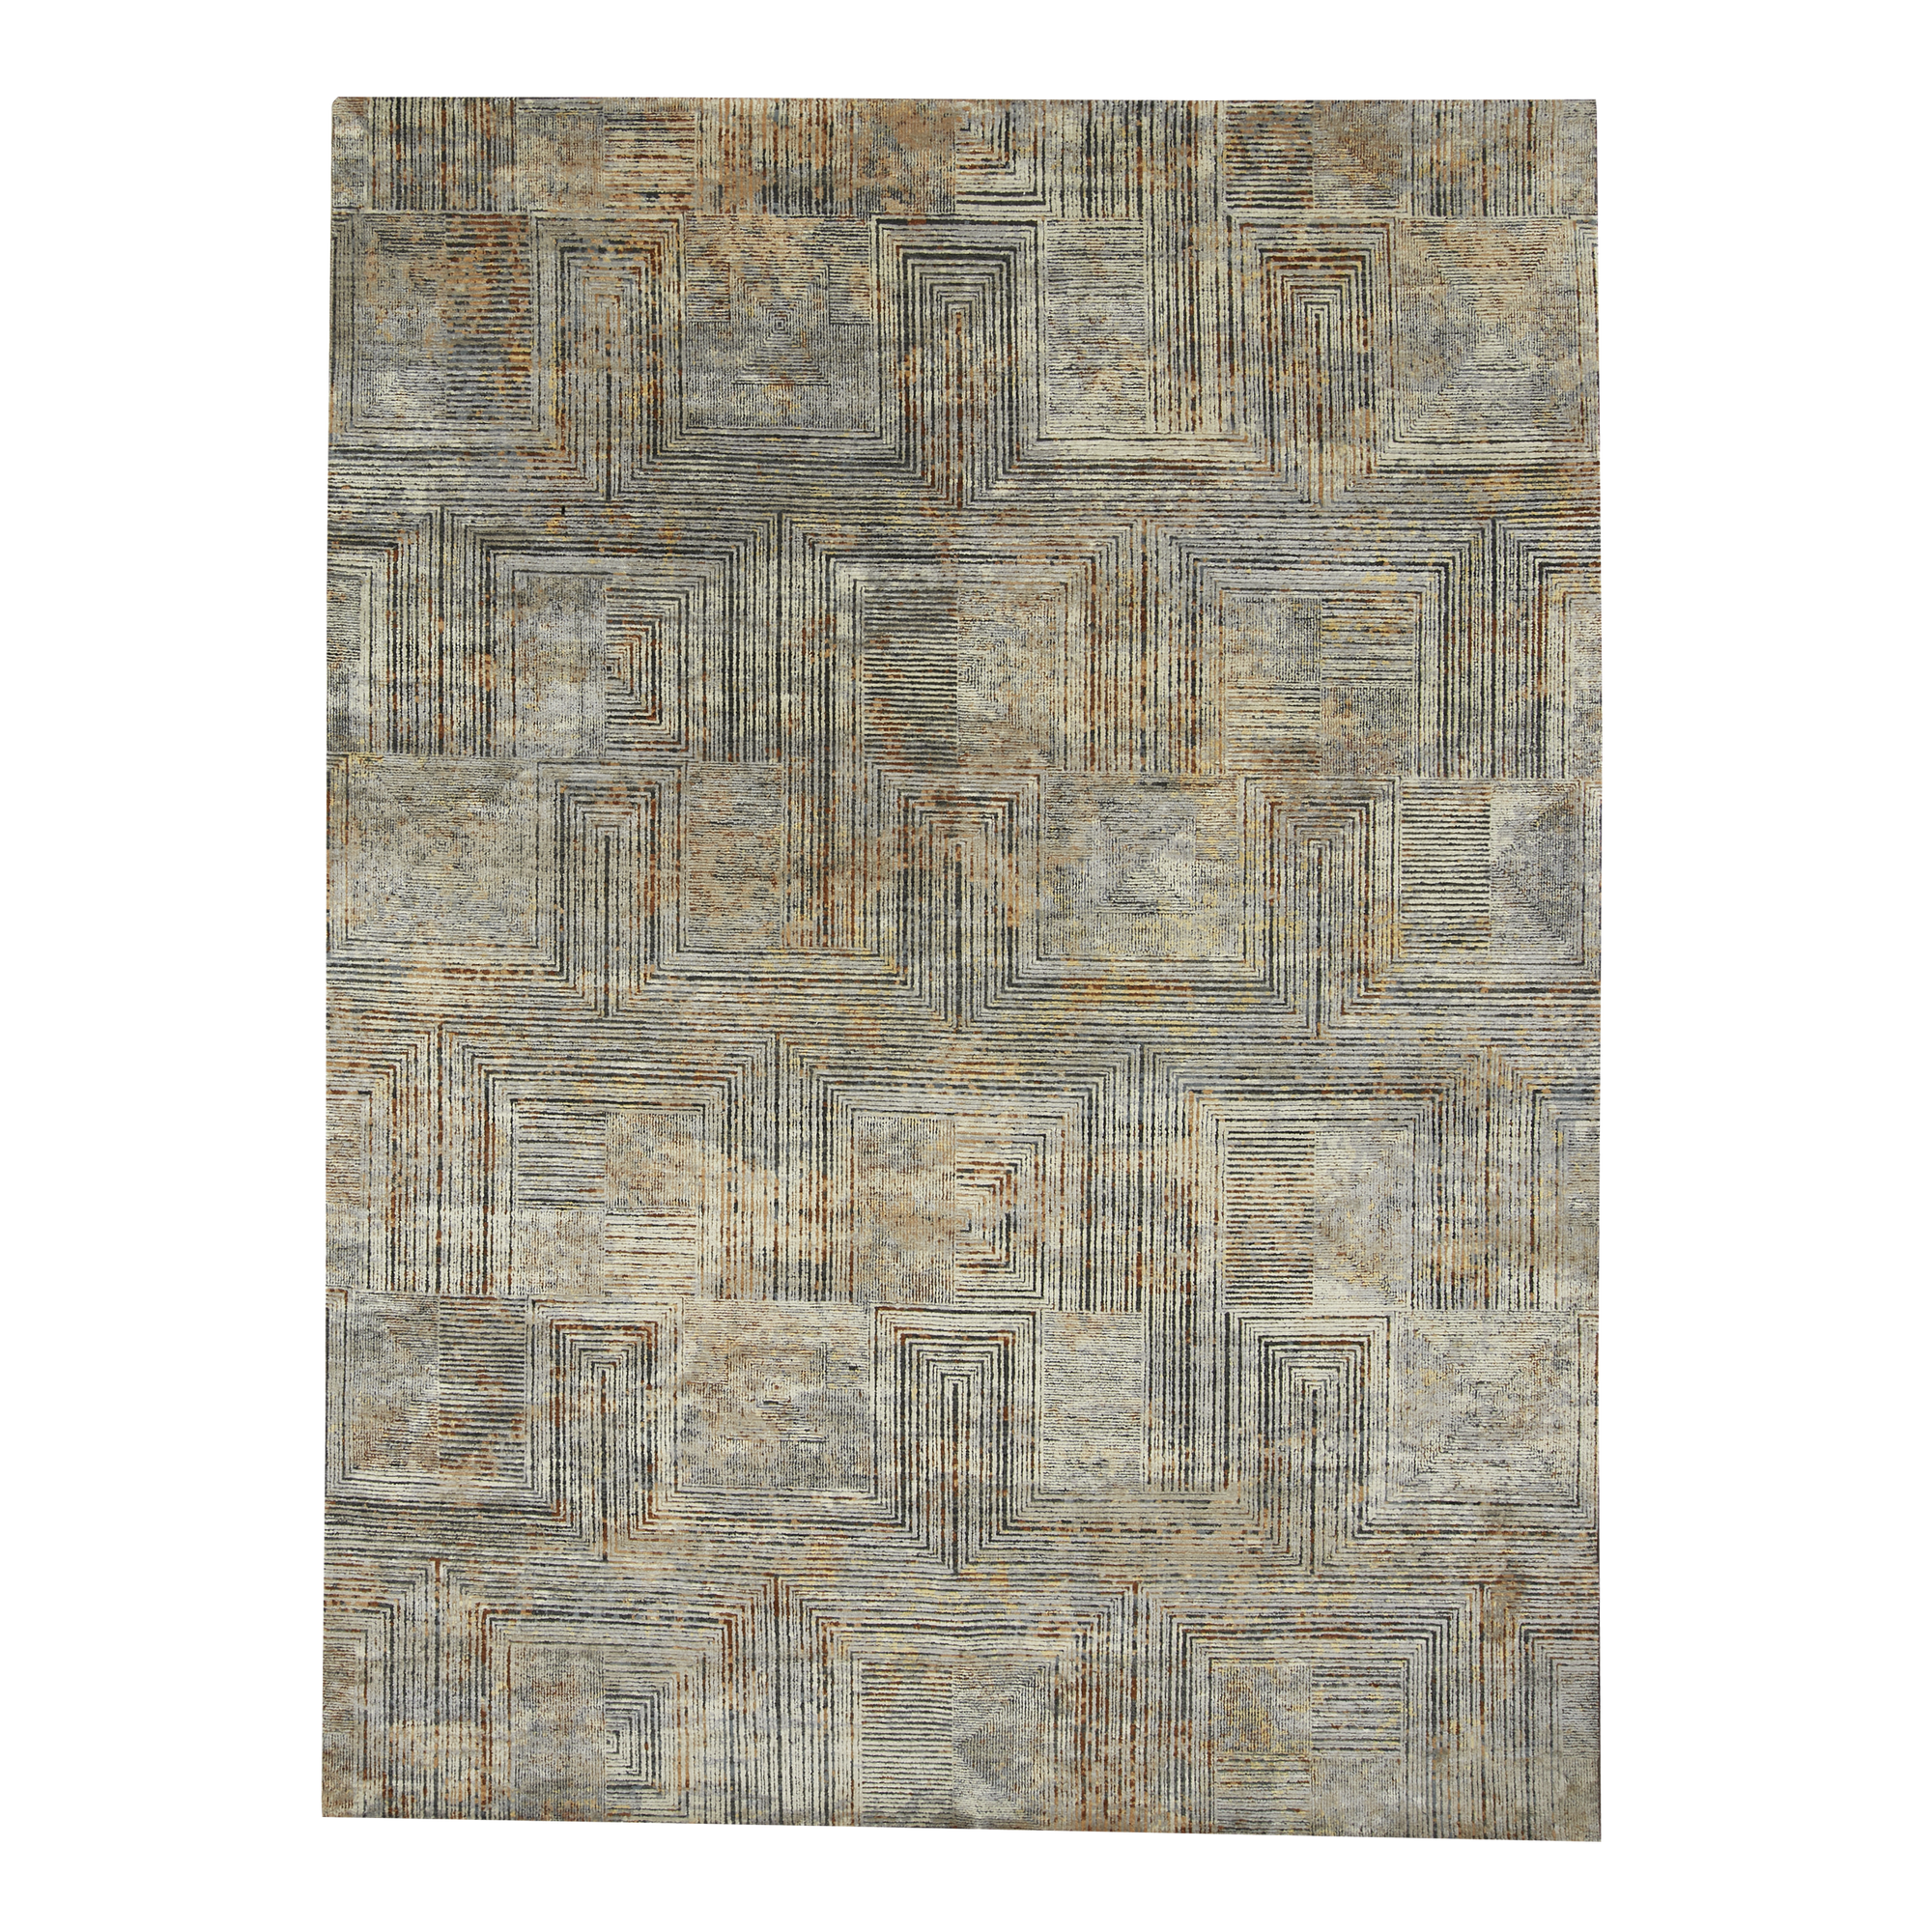 Designed to be passed through generations, the New Heirloom Rug Collection is crafted from recycled and upcycled wool, cocoon silk and sari silk.